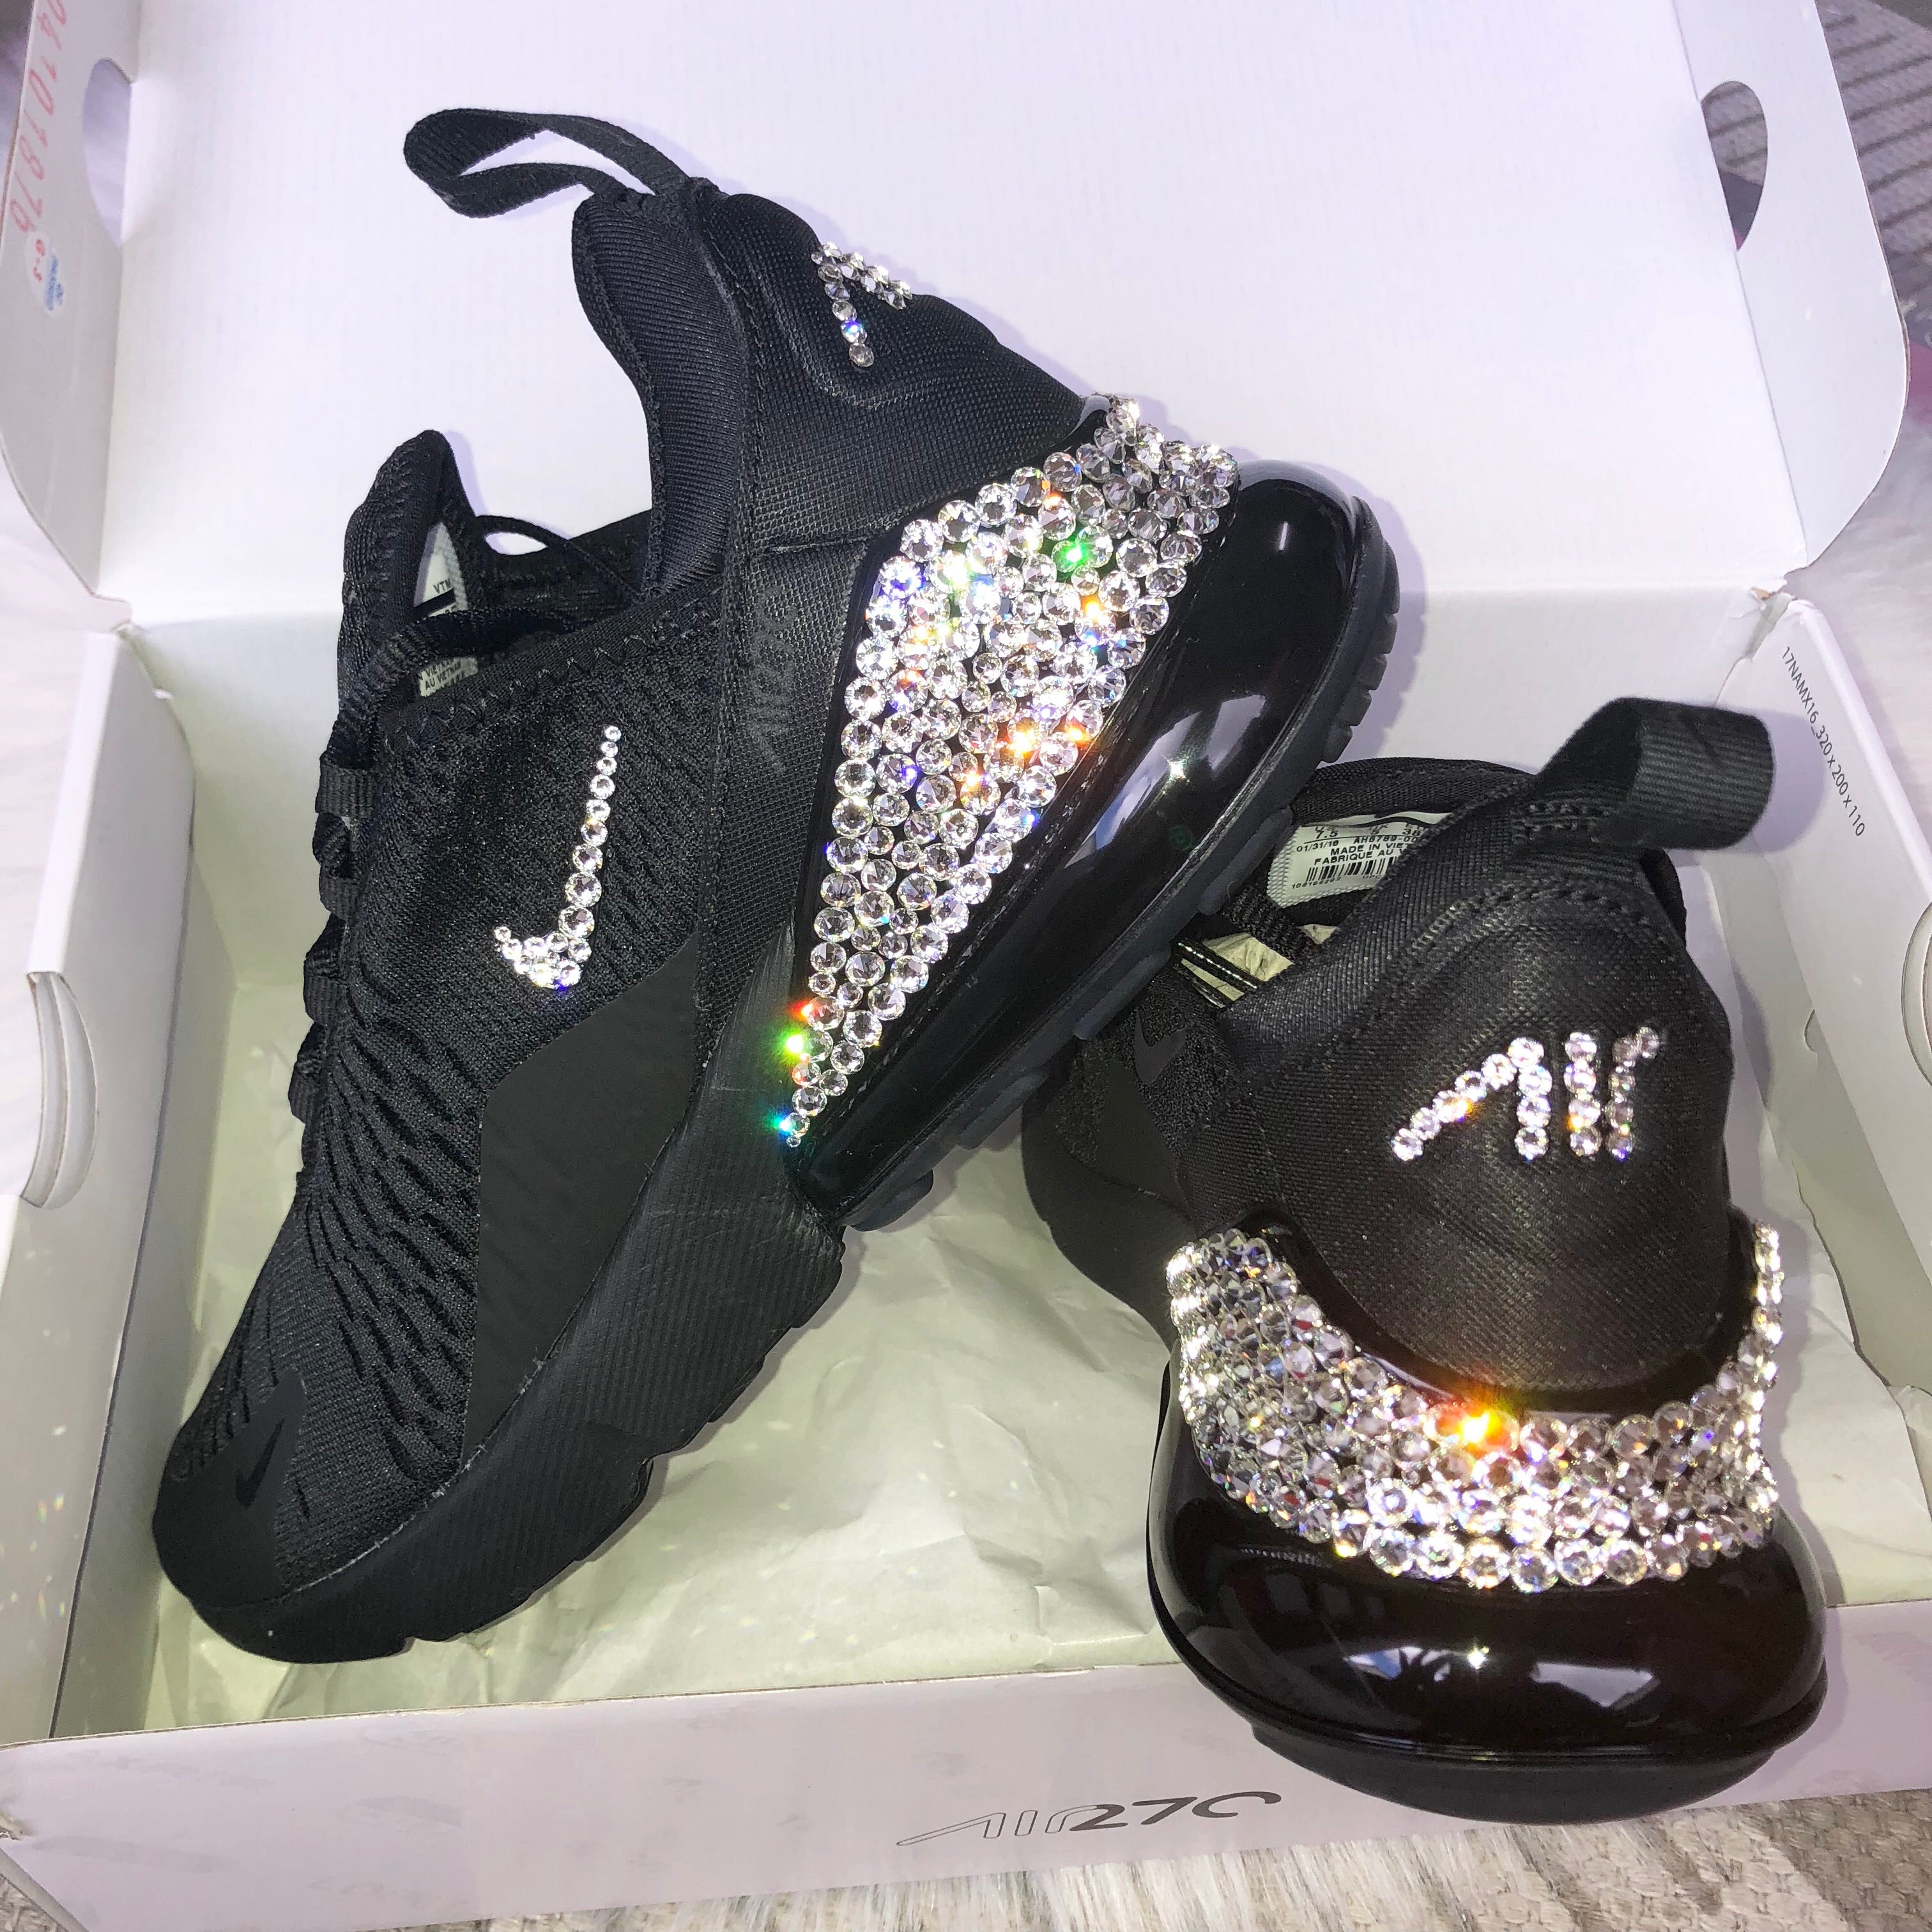 Diamond Kicks - Brand New LIMITED EDITION Women's Nike Air Max 270 Kicks in  Rainbow encrusted with over 800 Swarovski Crystals 😍😍😍 This colour was  released to us by Nike last week